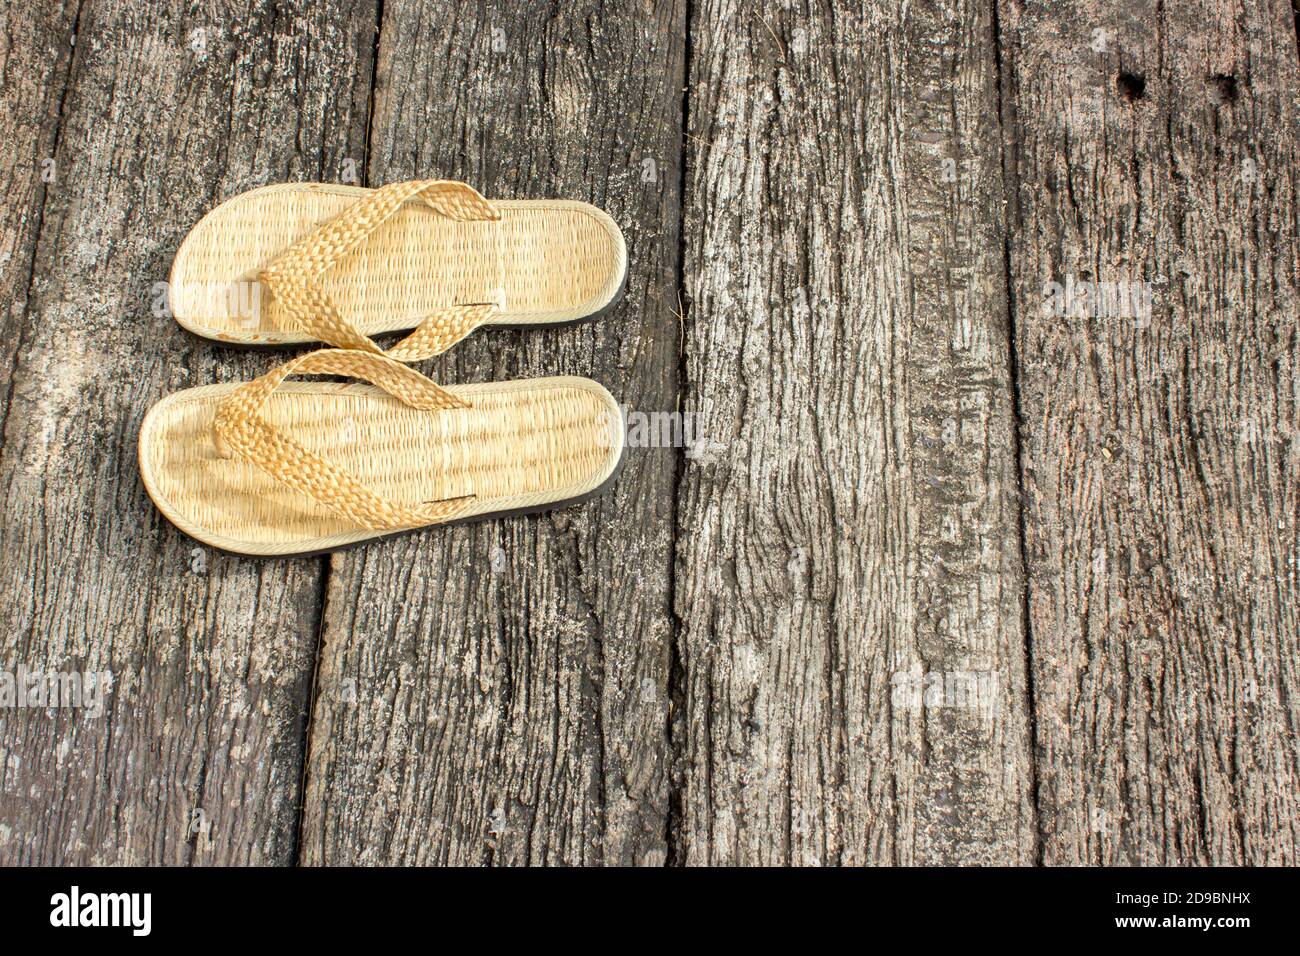 Shoe weave,in front of the hotel room on the old wood texture. Stock Photo